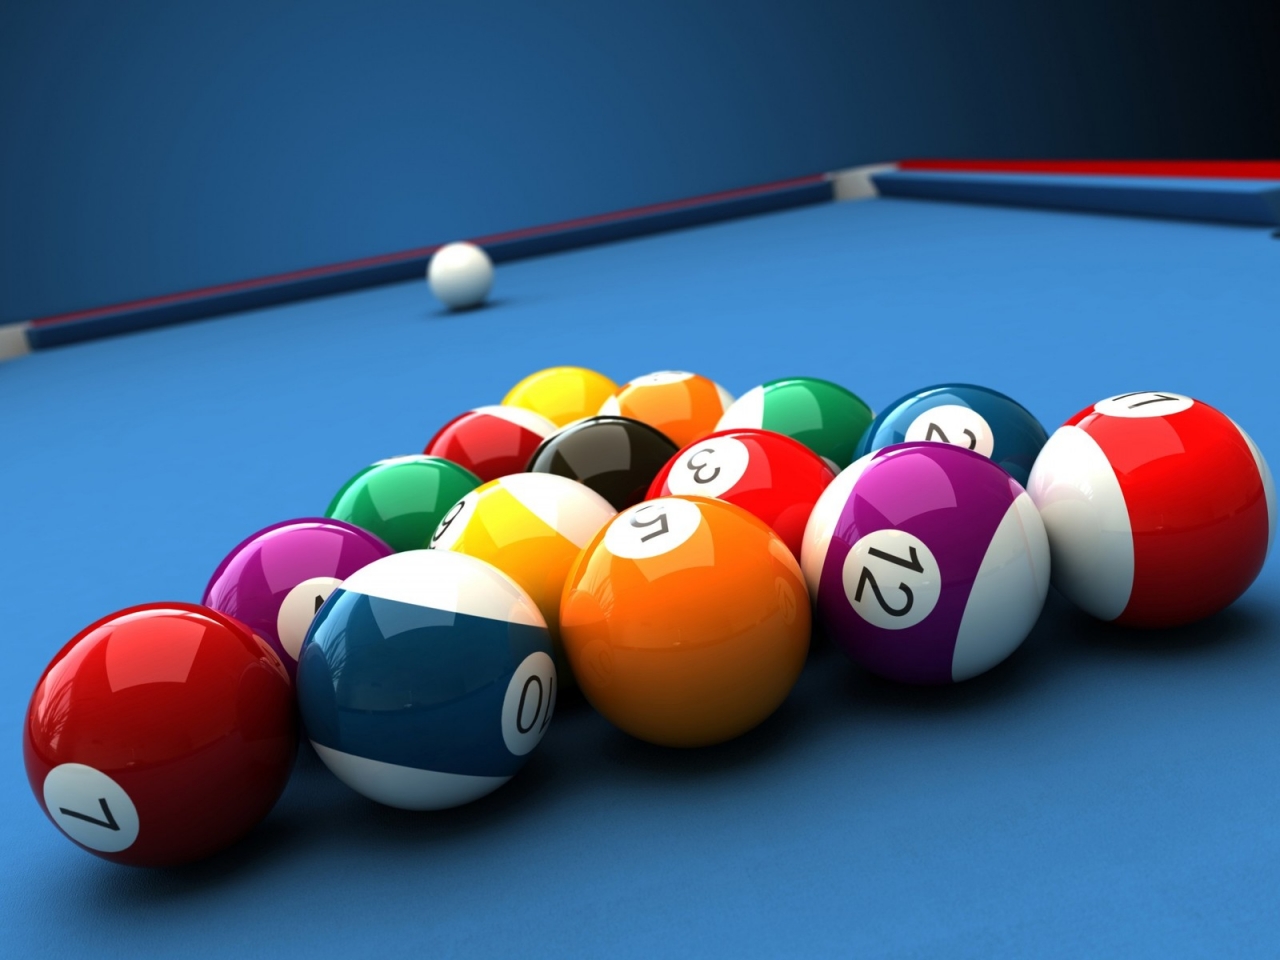 Billiards Table and Balls for 1280 x 960 resolution